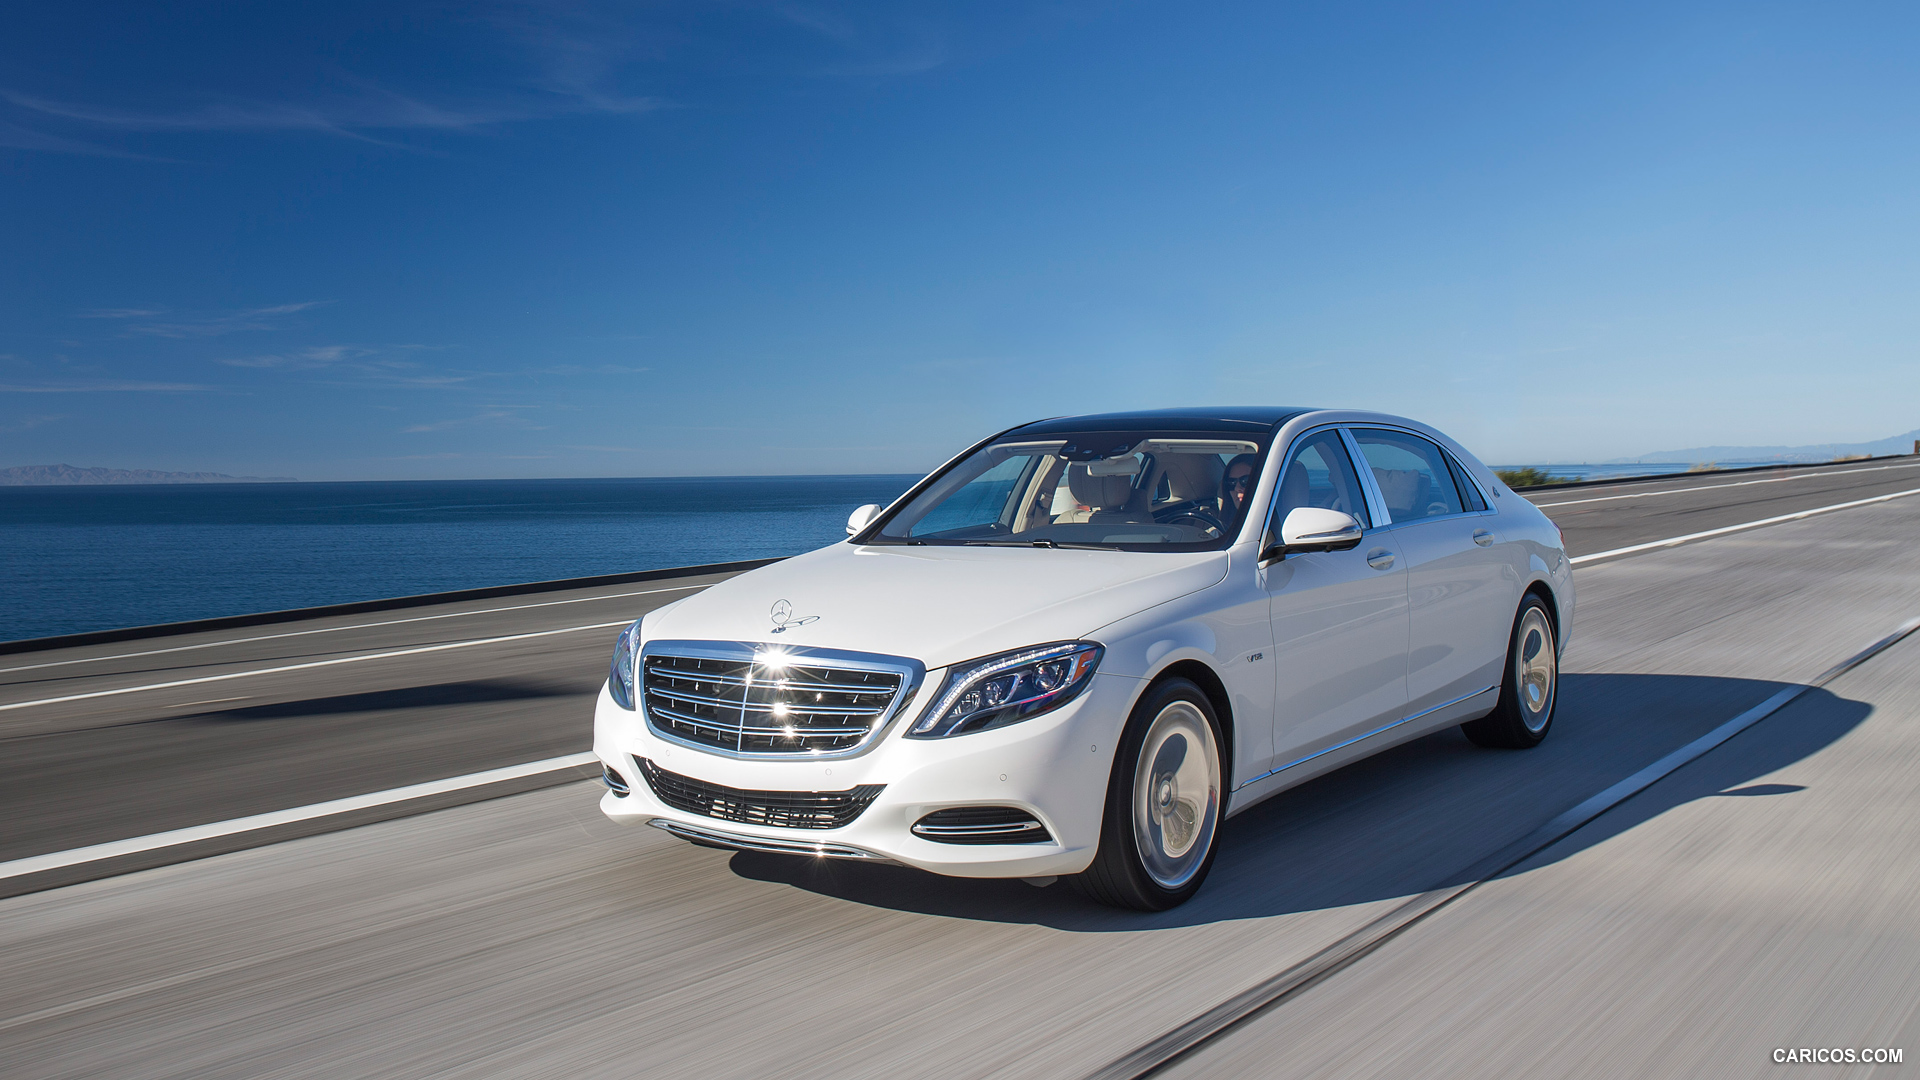 Mercedes-Maybach S600 HD wallpapers free download